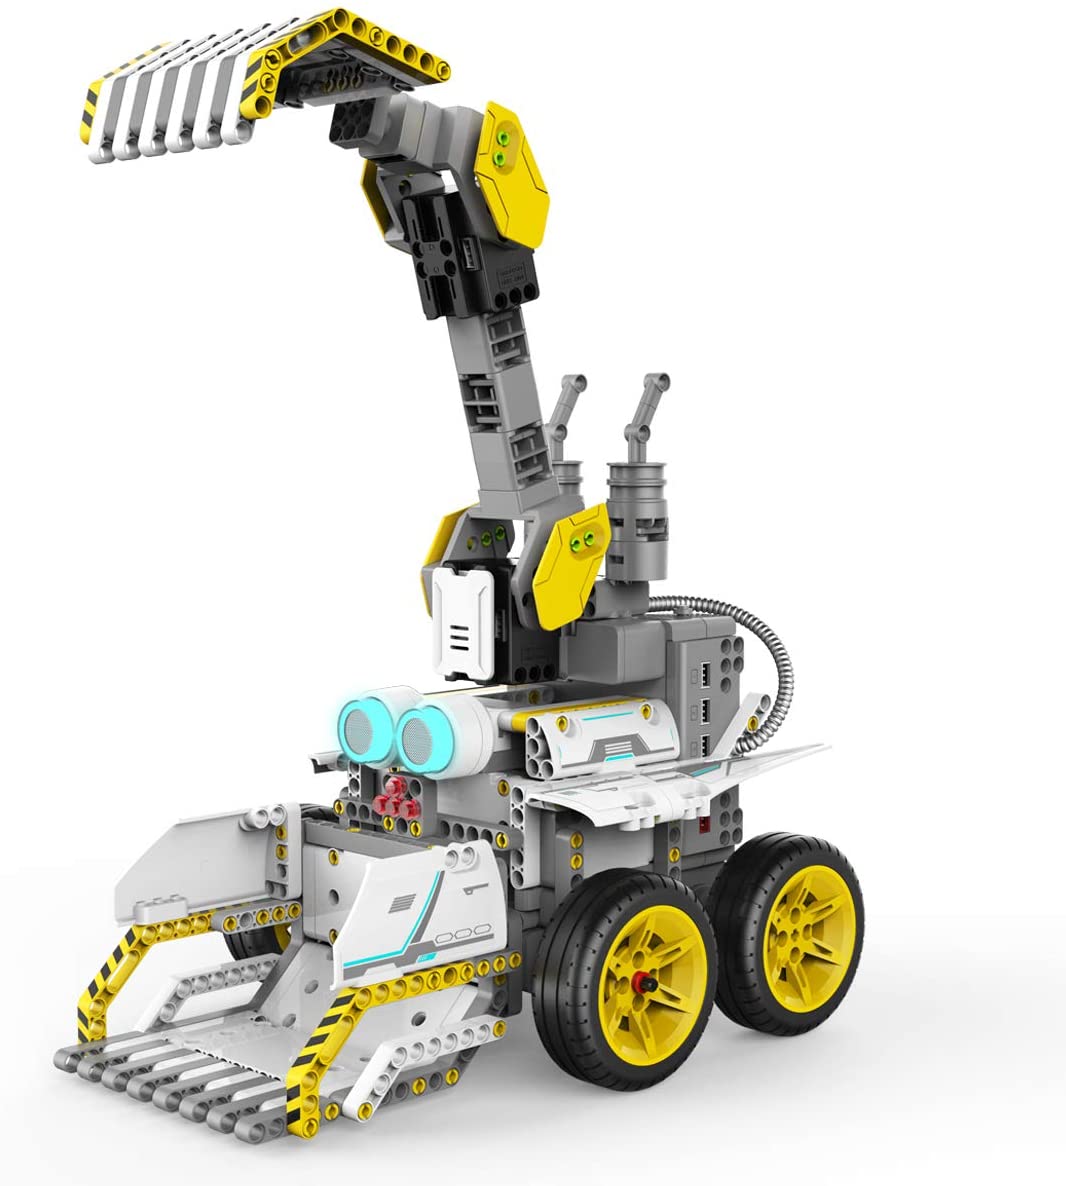 61H7D3Rz6El. Ac Sl1200 Rumble, Crush And Plow Into The New Ubtech Jimu Robot Builderbots Series: Truckbots Kit. With This Kit You Can Create Buildable, Codable Robots Like Dozerbot And Dirtbot Or Design Your Own Jimu Robot Creation. The Fun Is Extended With The Blockly Coding Platform, Allowing Kids Ages 8 And Up To Build And Code These Robots To Perform Countless Programs And Tricks. Download The Free Jimu App That Has Step By Step, 3D, 360° Building Instructions. Ages: 8+ Years. Includes: &Lt;Ul&Gt; &Lt;Li&Gt;410 Snap-Together Parts&Lt;/Li&Gt; &Lt;Li&Gt;2 Smooth Motion Robotic Servo Motors&Lt;/Li&Gt; &Lt;Li&Gt;2 Dc Motors&Lt;/Li&Gt; &Lt;Li&Gt;1 Ultrasonic Sensor &Amp; Rgb Light&Lt;/Li&Gt; &Lt;Li&Gt;1 Main Control Box&Lt;/Li&Gt; &Lt;Li&Gt;Usb Cable And Quick Start Guide Included&Lt;/Li&Gt; &Lt;/Ul&Gt; Requires: &Lt;Ul&Gt; &Lt;Li&Gt;A Compatible Ios Or Android Device Is Required (Sold Separately).&Lt;/Li&Gt; &Lt;/Ul&Gt; Build.code.create: &Lt;Ul&Gt; &Lt;Li&Gt;Construct Dozerbot, Dirtbot Or Design Your Own Jimu Robot Creation&Lt;/Li&Gt; &Lt;Li&Gt;Learn To Use Blockly Coding To Program Your Robot To Navigate Obstacles, Carry Objects, Create Color Effects And More&Lt;/Li&Gt; &Lt;Li&Gt;Create Entirely New, Custom Actions With The Prp (Pose, Record, Play) Function&Lt;/Li&Gt; &Lt;Li&Gt;No Tools Required – Our 3D, 360° Animated Instruction In The Free Jimu App Walk Users Through The Steps&Lt;/Li&Gt; &Lt;Li&Gt;Great For Ages 8 And Up&Lt;/Li&Gt; &Lt;/Ul&Gt; Ubtech Jimu Truckbots Kit Stem Edition Jra0102